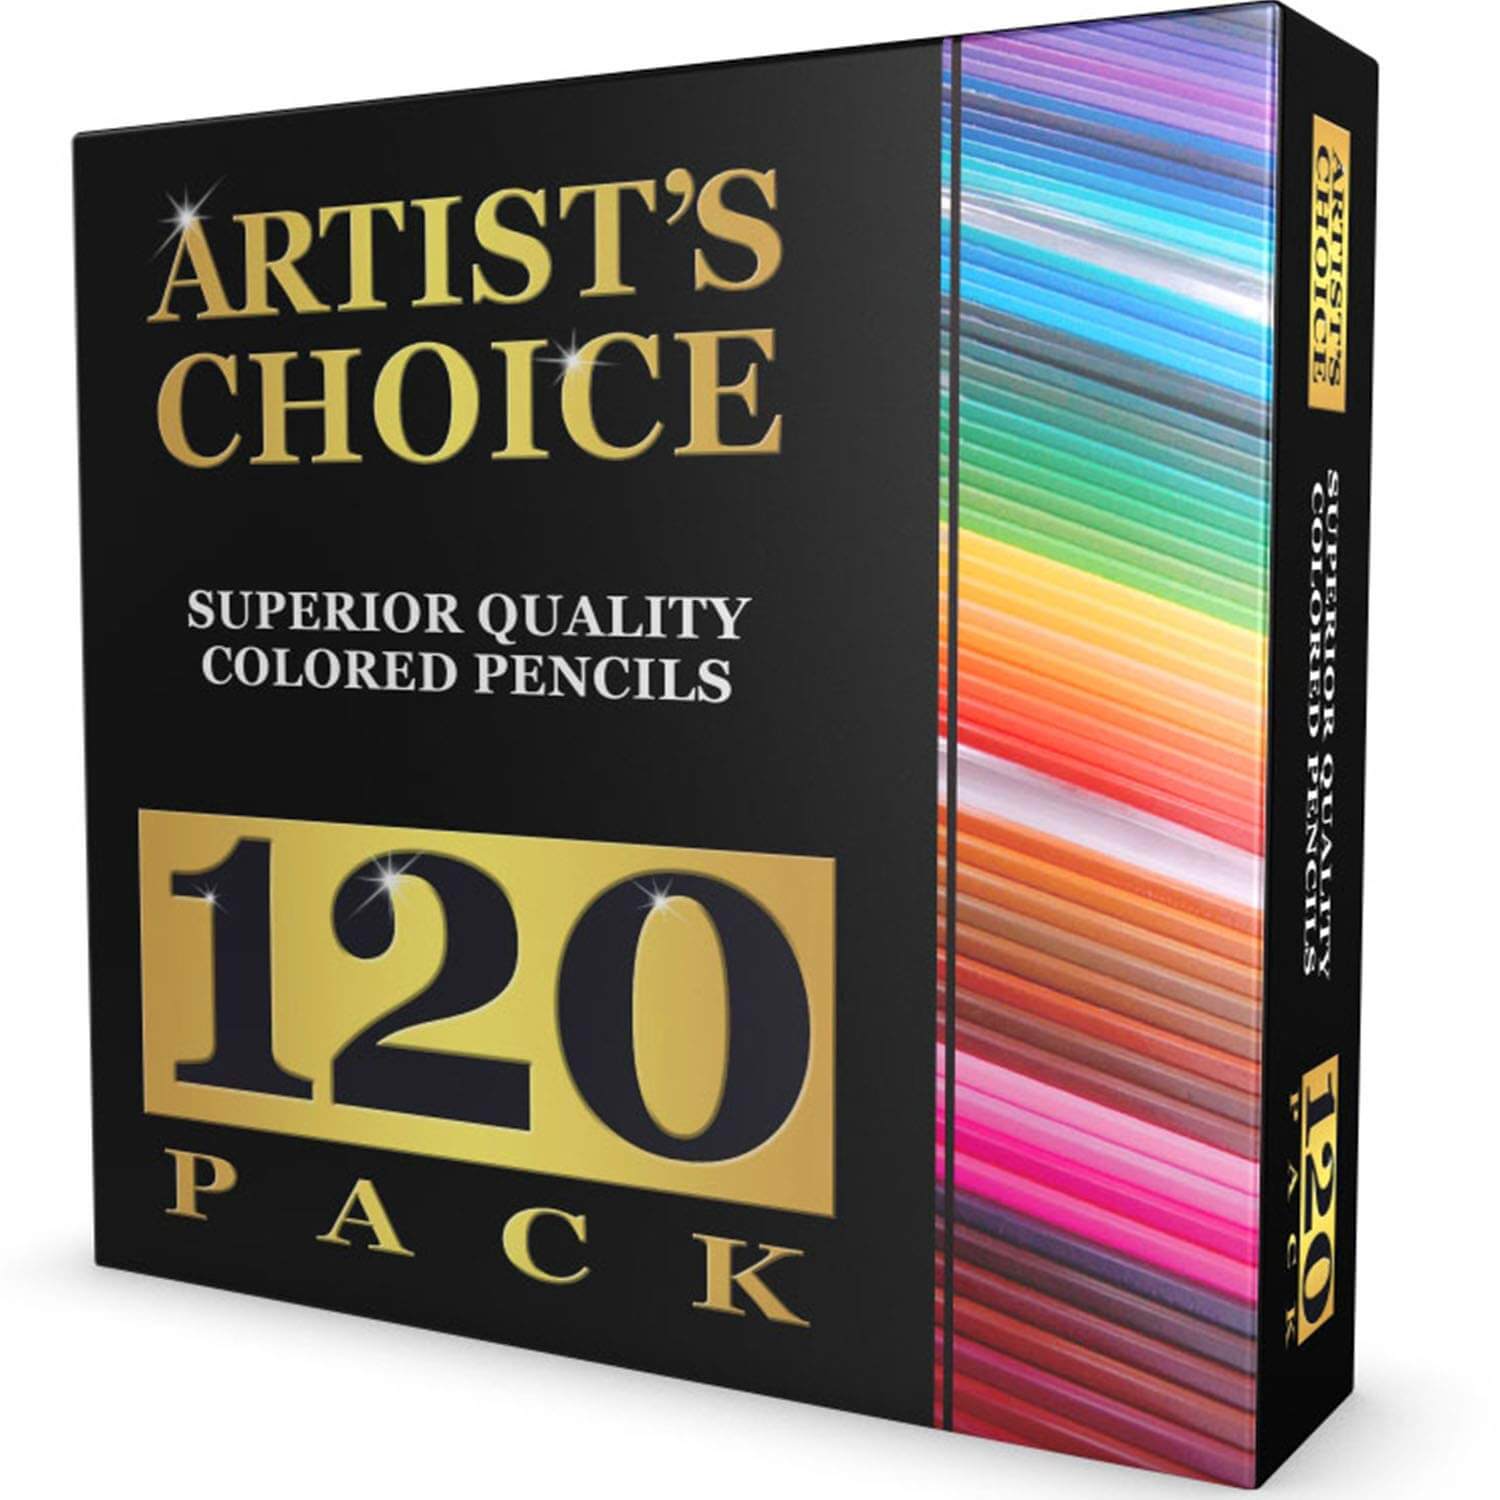 https://restylegraphic.com/wp-content/uploads/2019/05/Artists-Choice-120-Pack-Colored-Pencils.jpg